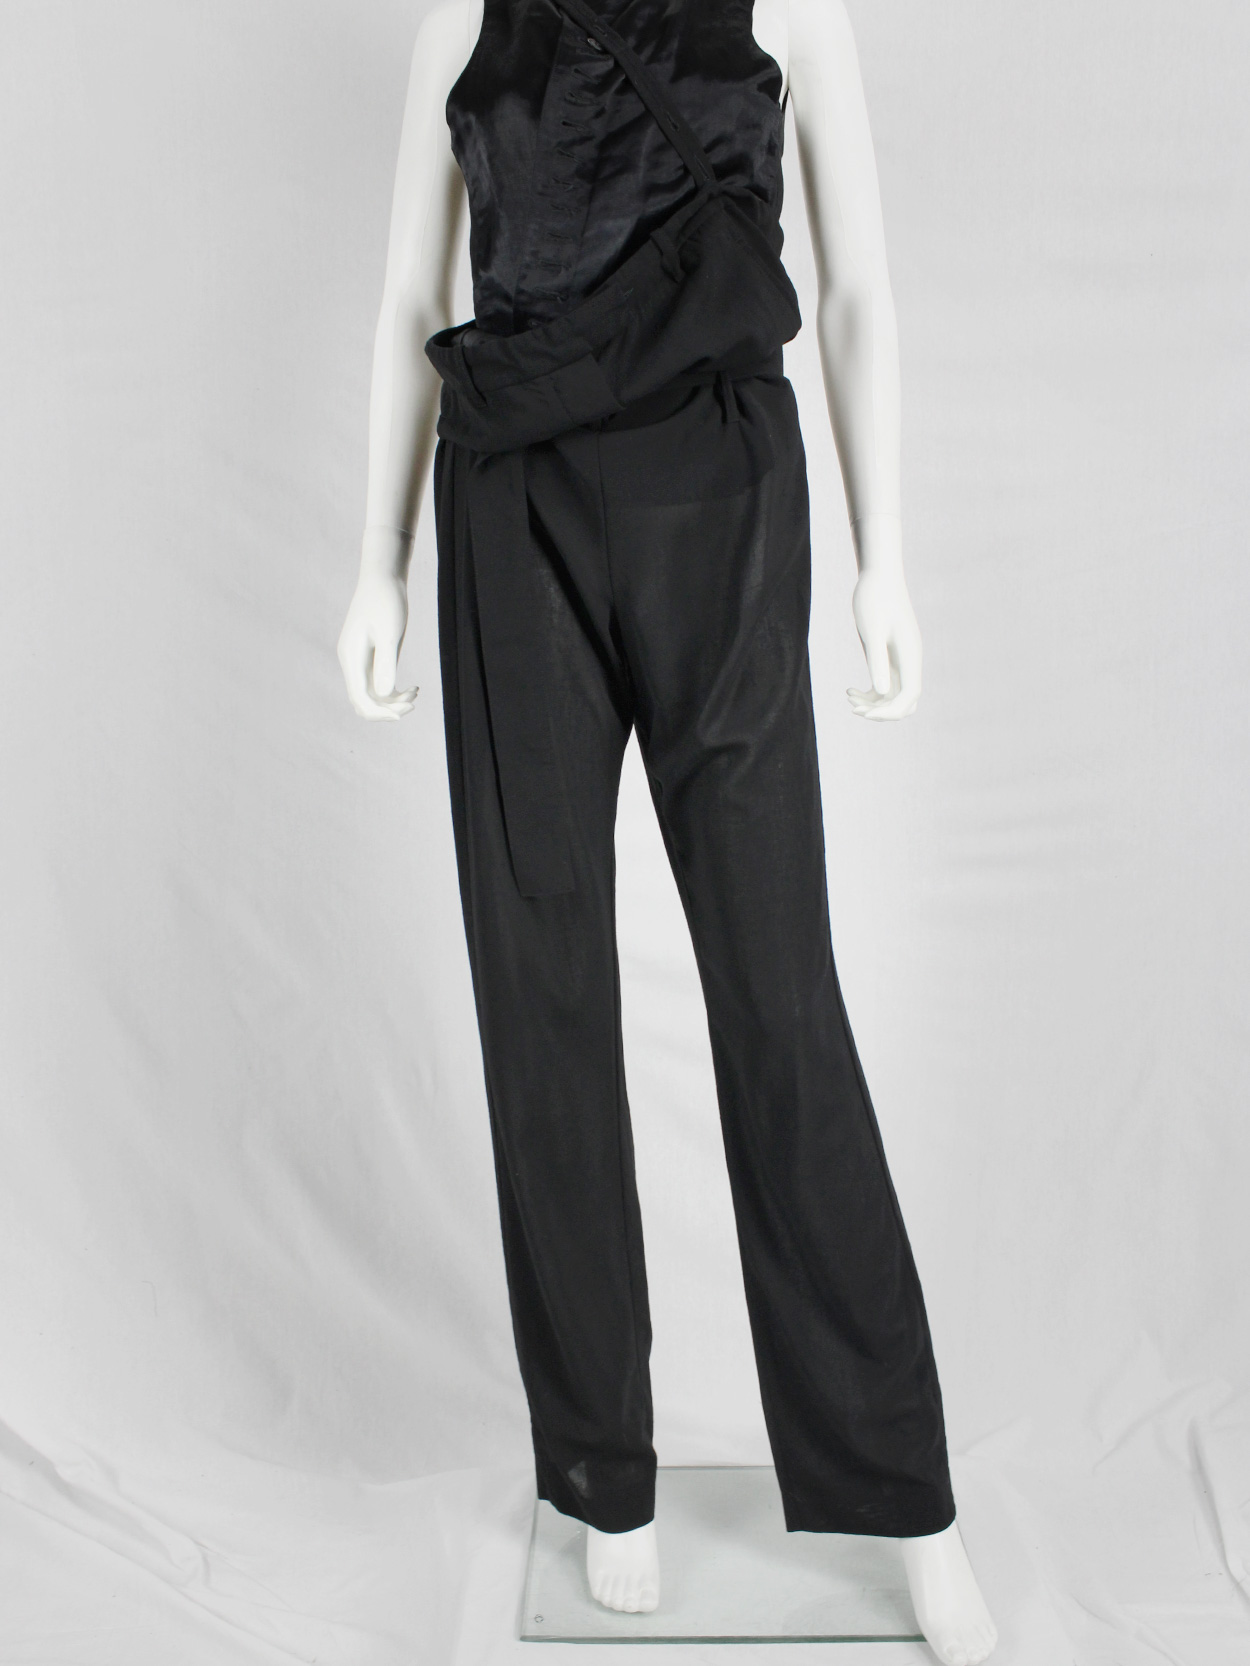 Ann Demeulemeester black draped trousers with strap or jumpsuit ...